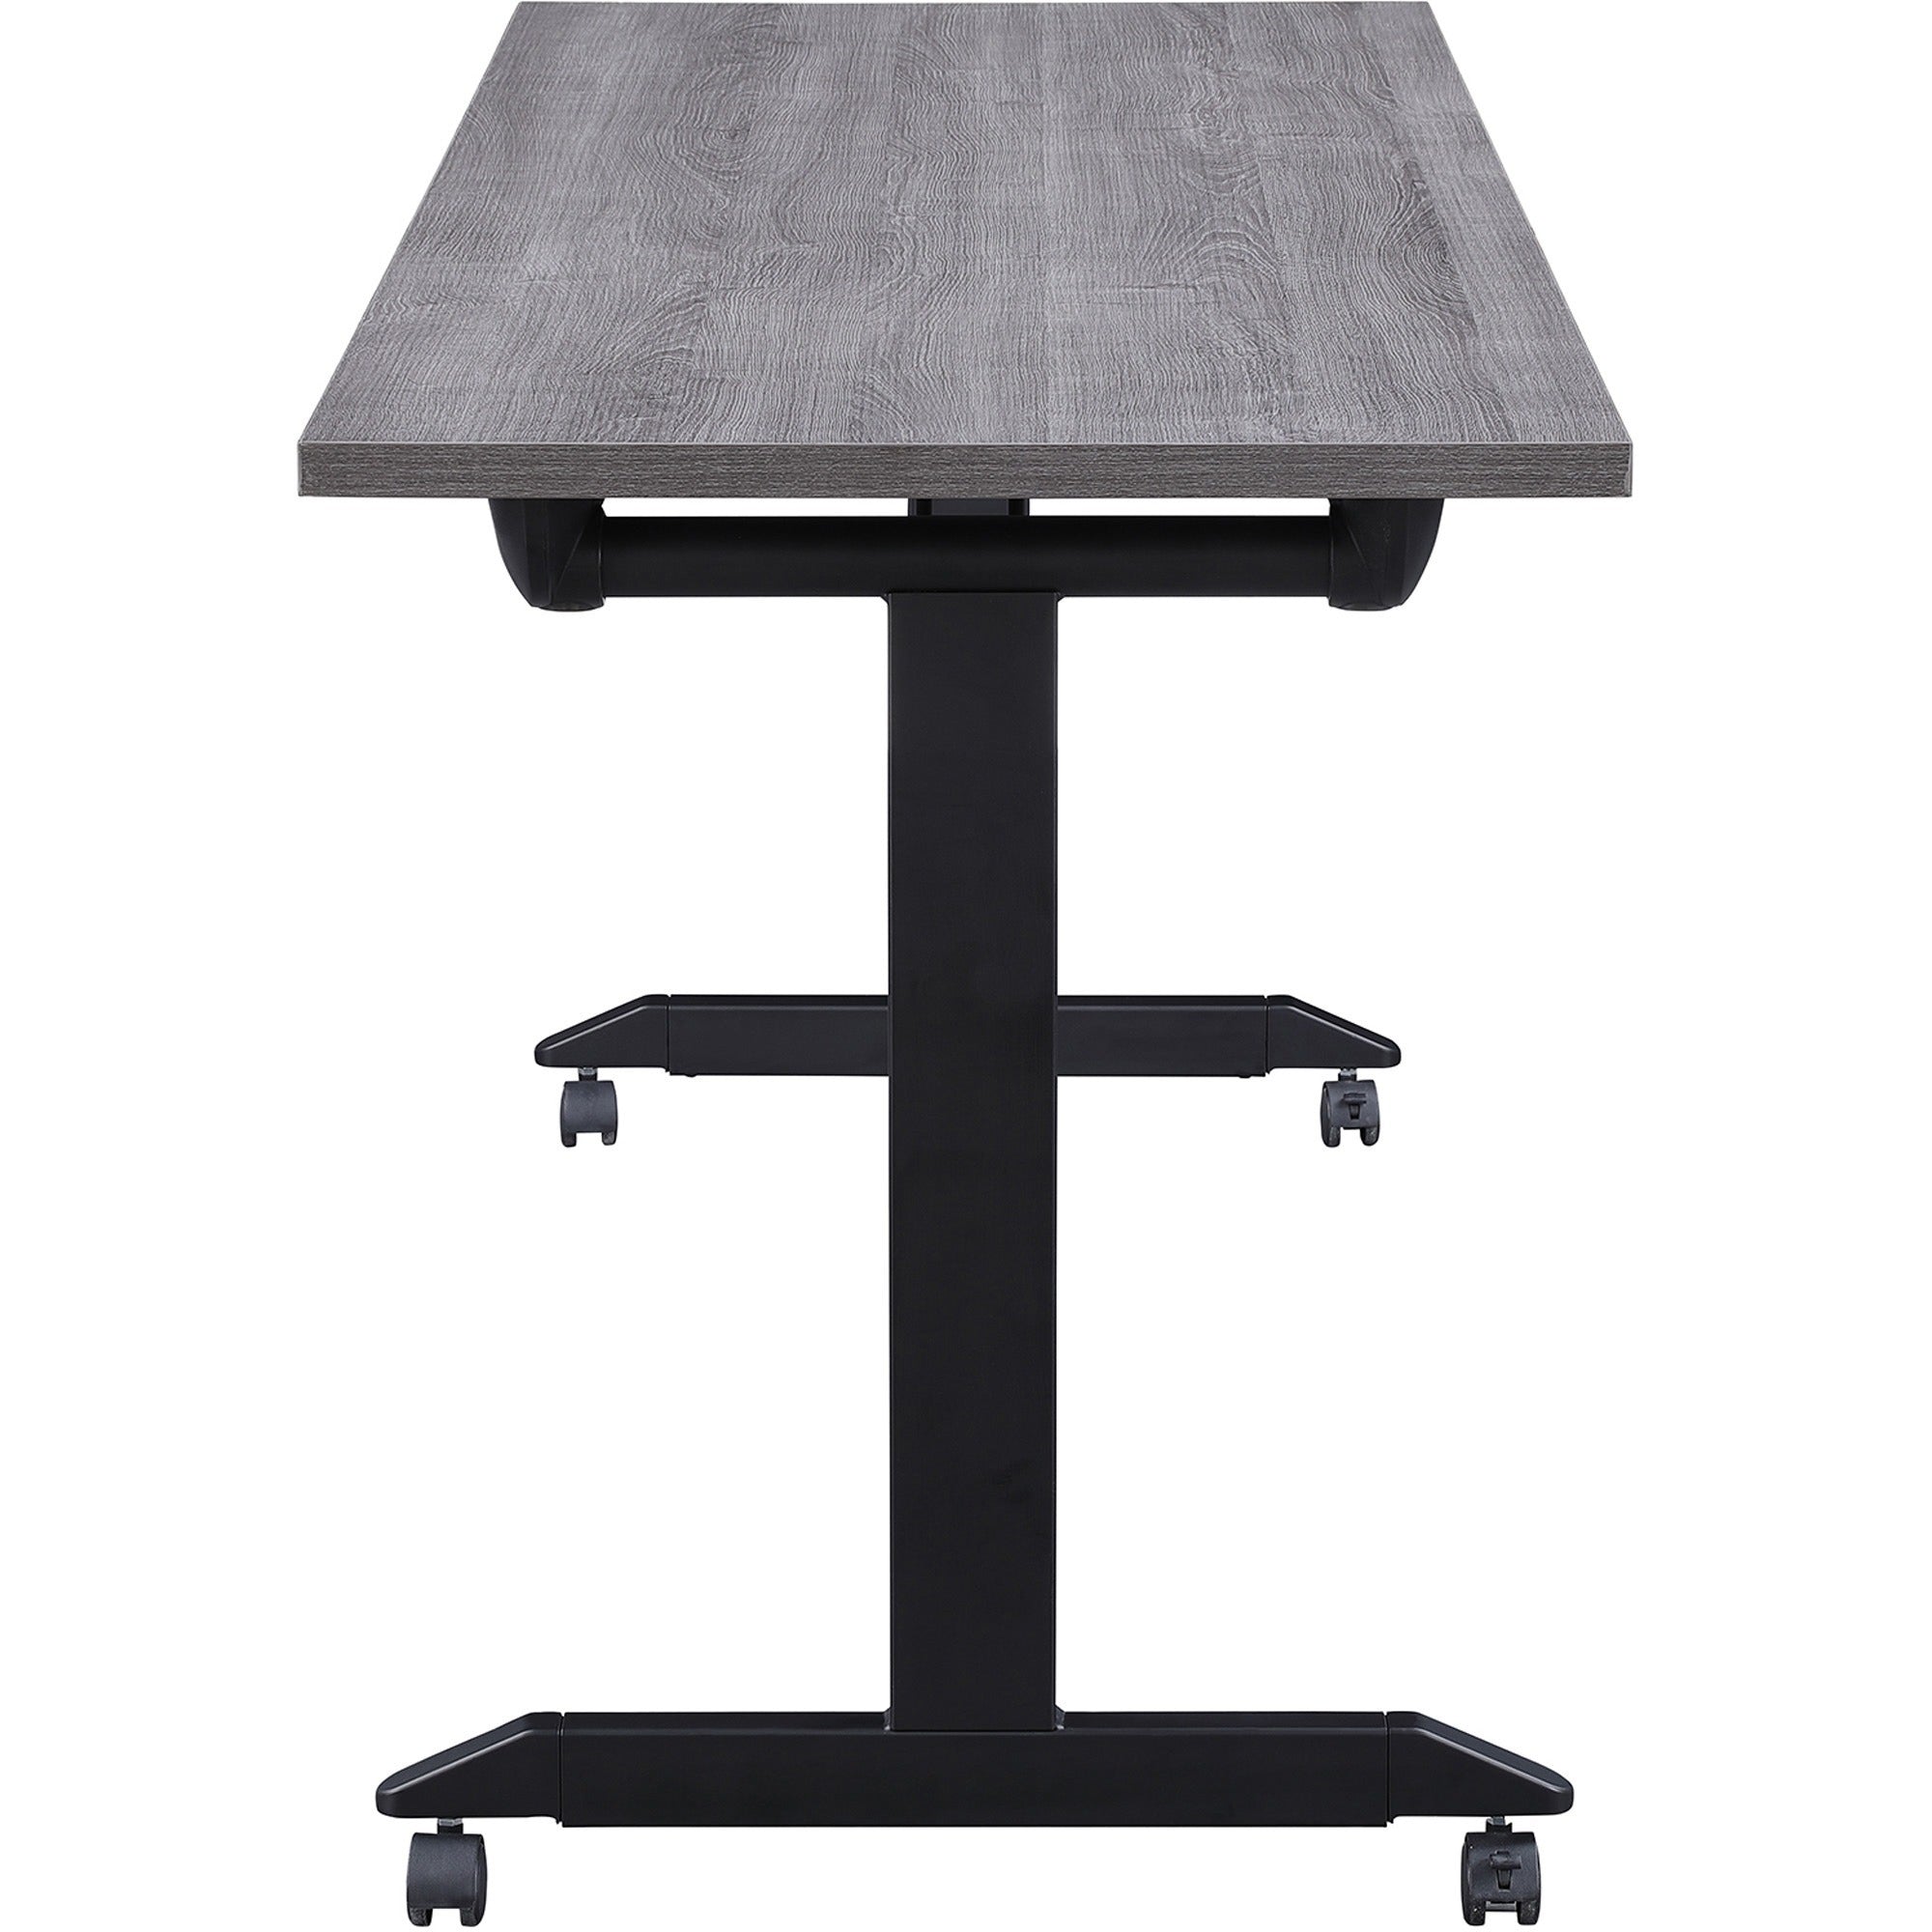 lorell-mobile-folding-training-table-for-table-toprectangle-top-powder-coated-base-200-lb-capacity-x-63-table-top-width-2950-height-x-63-width-x-2950-depth-assembly-required-gray-1-each_llr60741 - 4